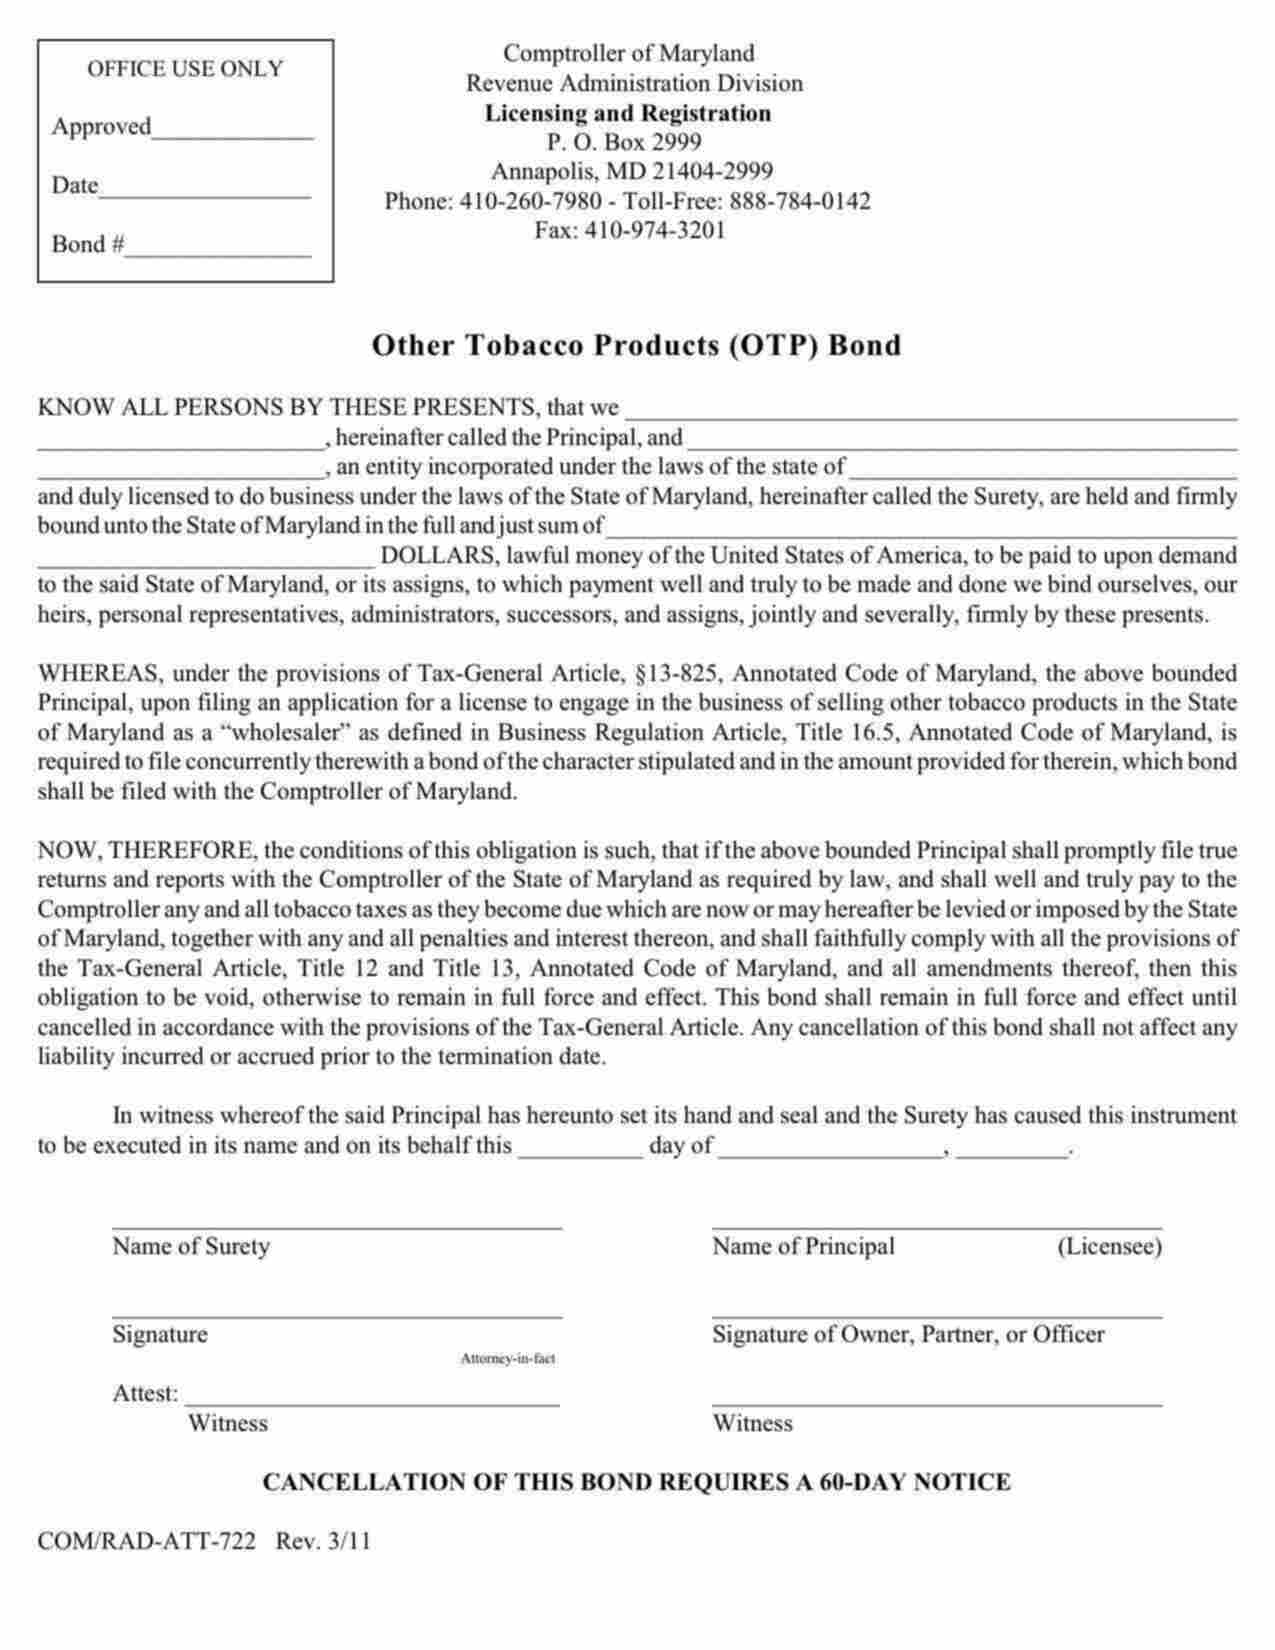 Maryland Other Tobacco Products (OTP) Bond Form